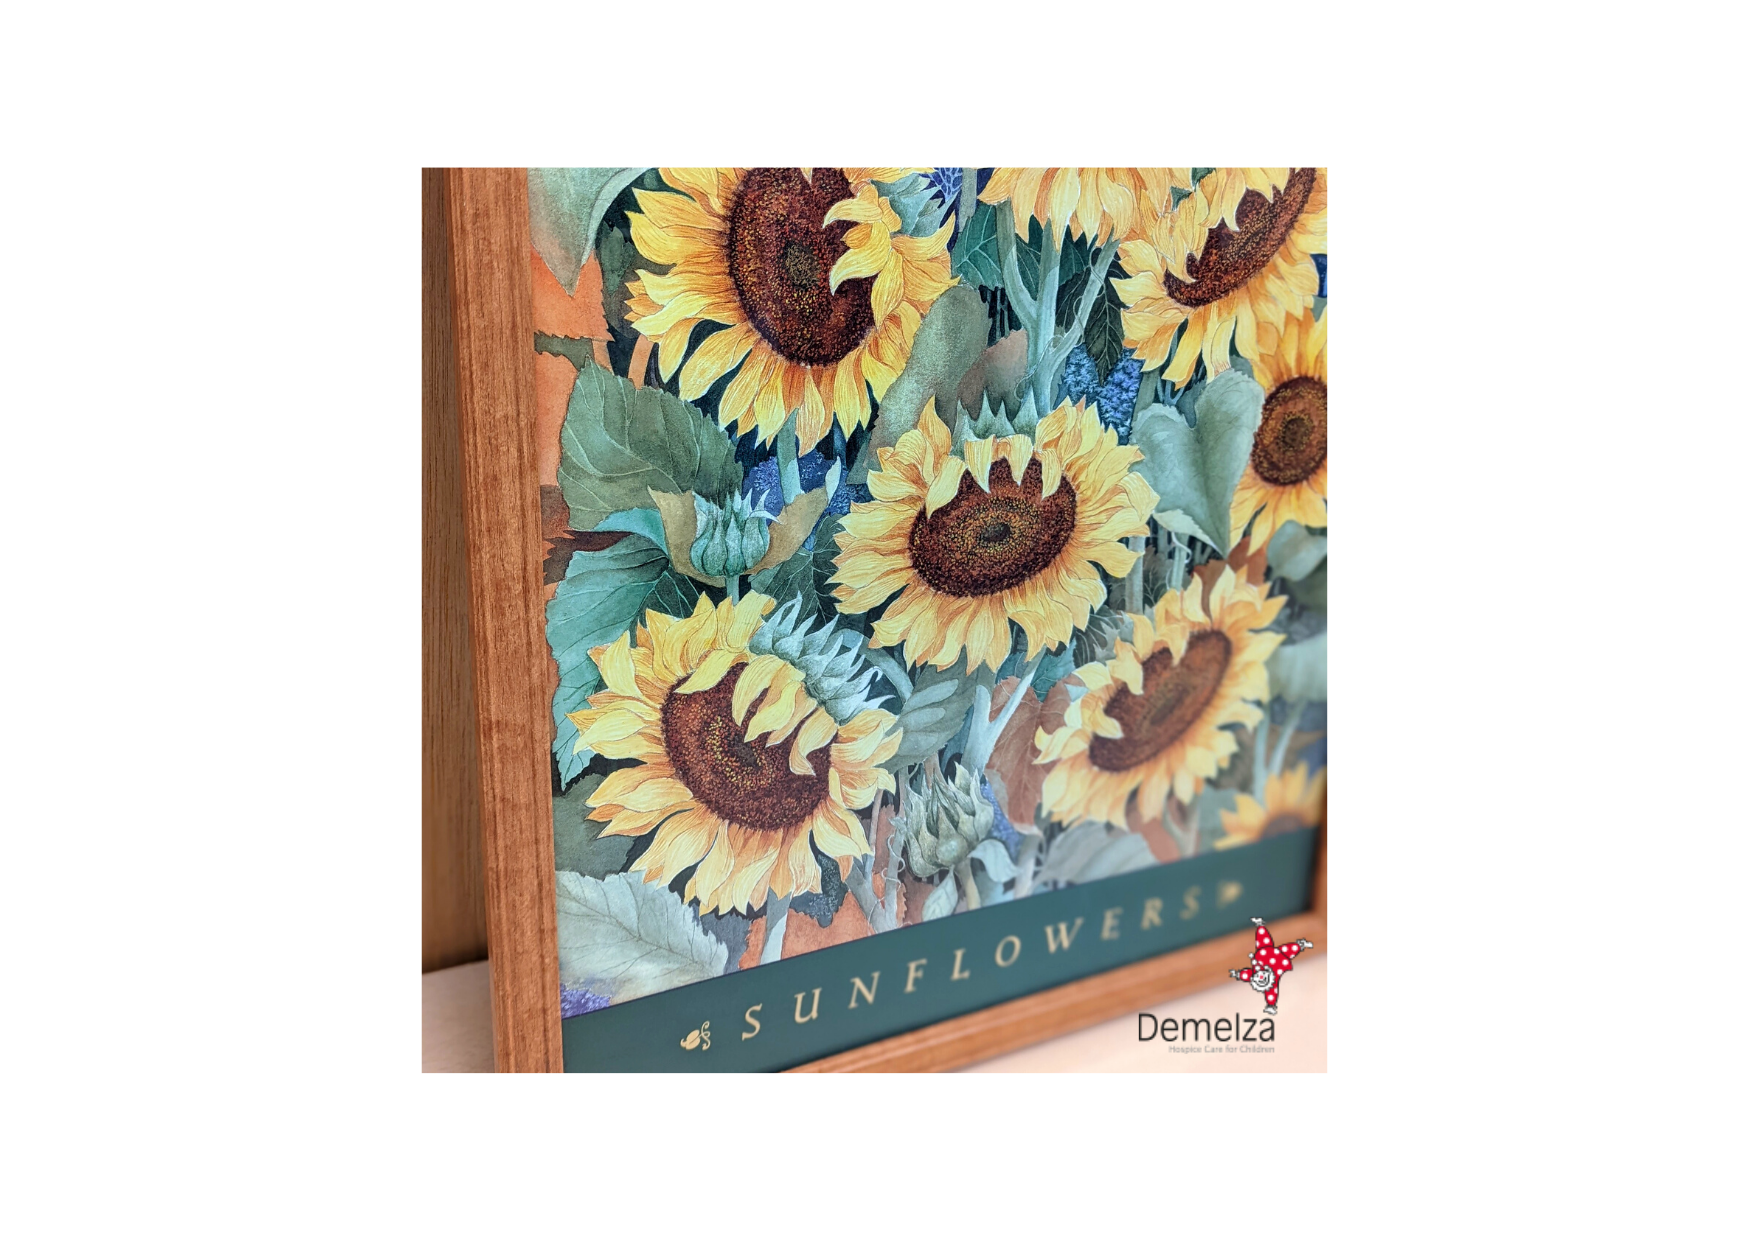  Sunflowers Poster Print in Brown Wooden Frame